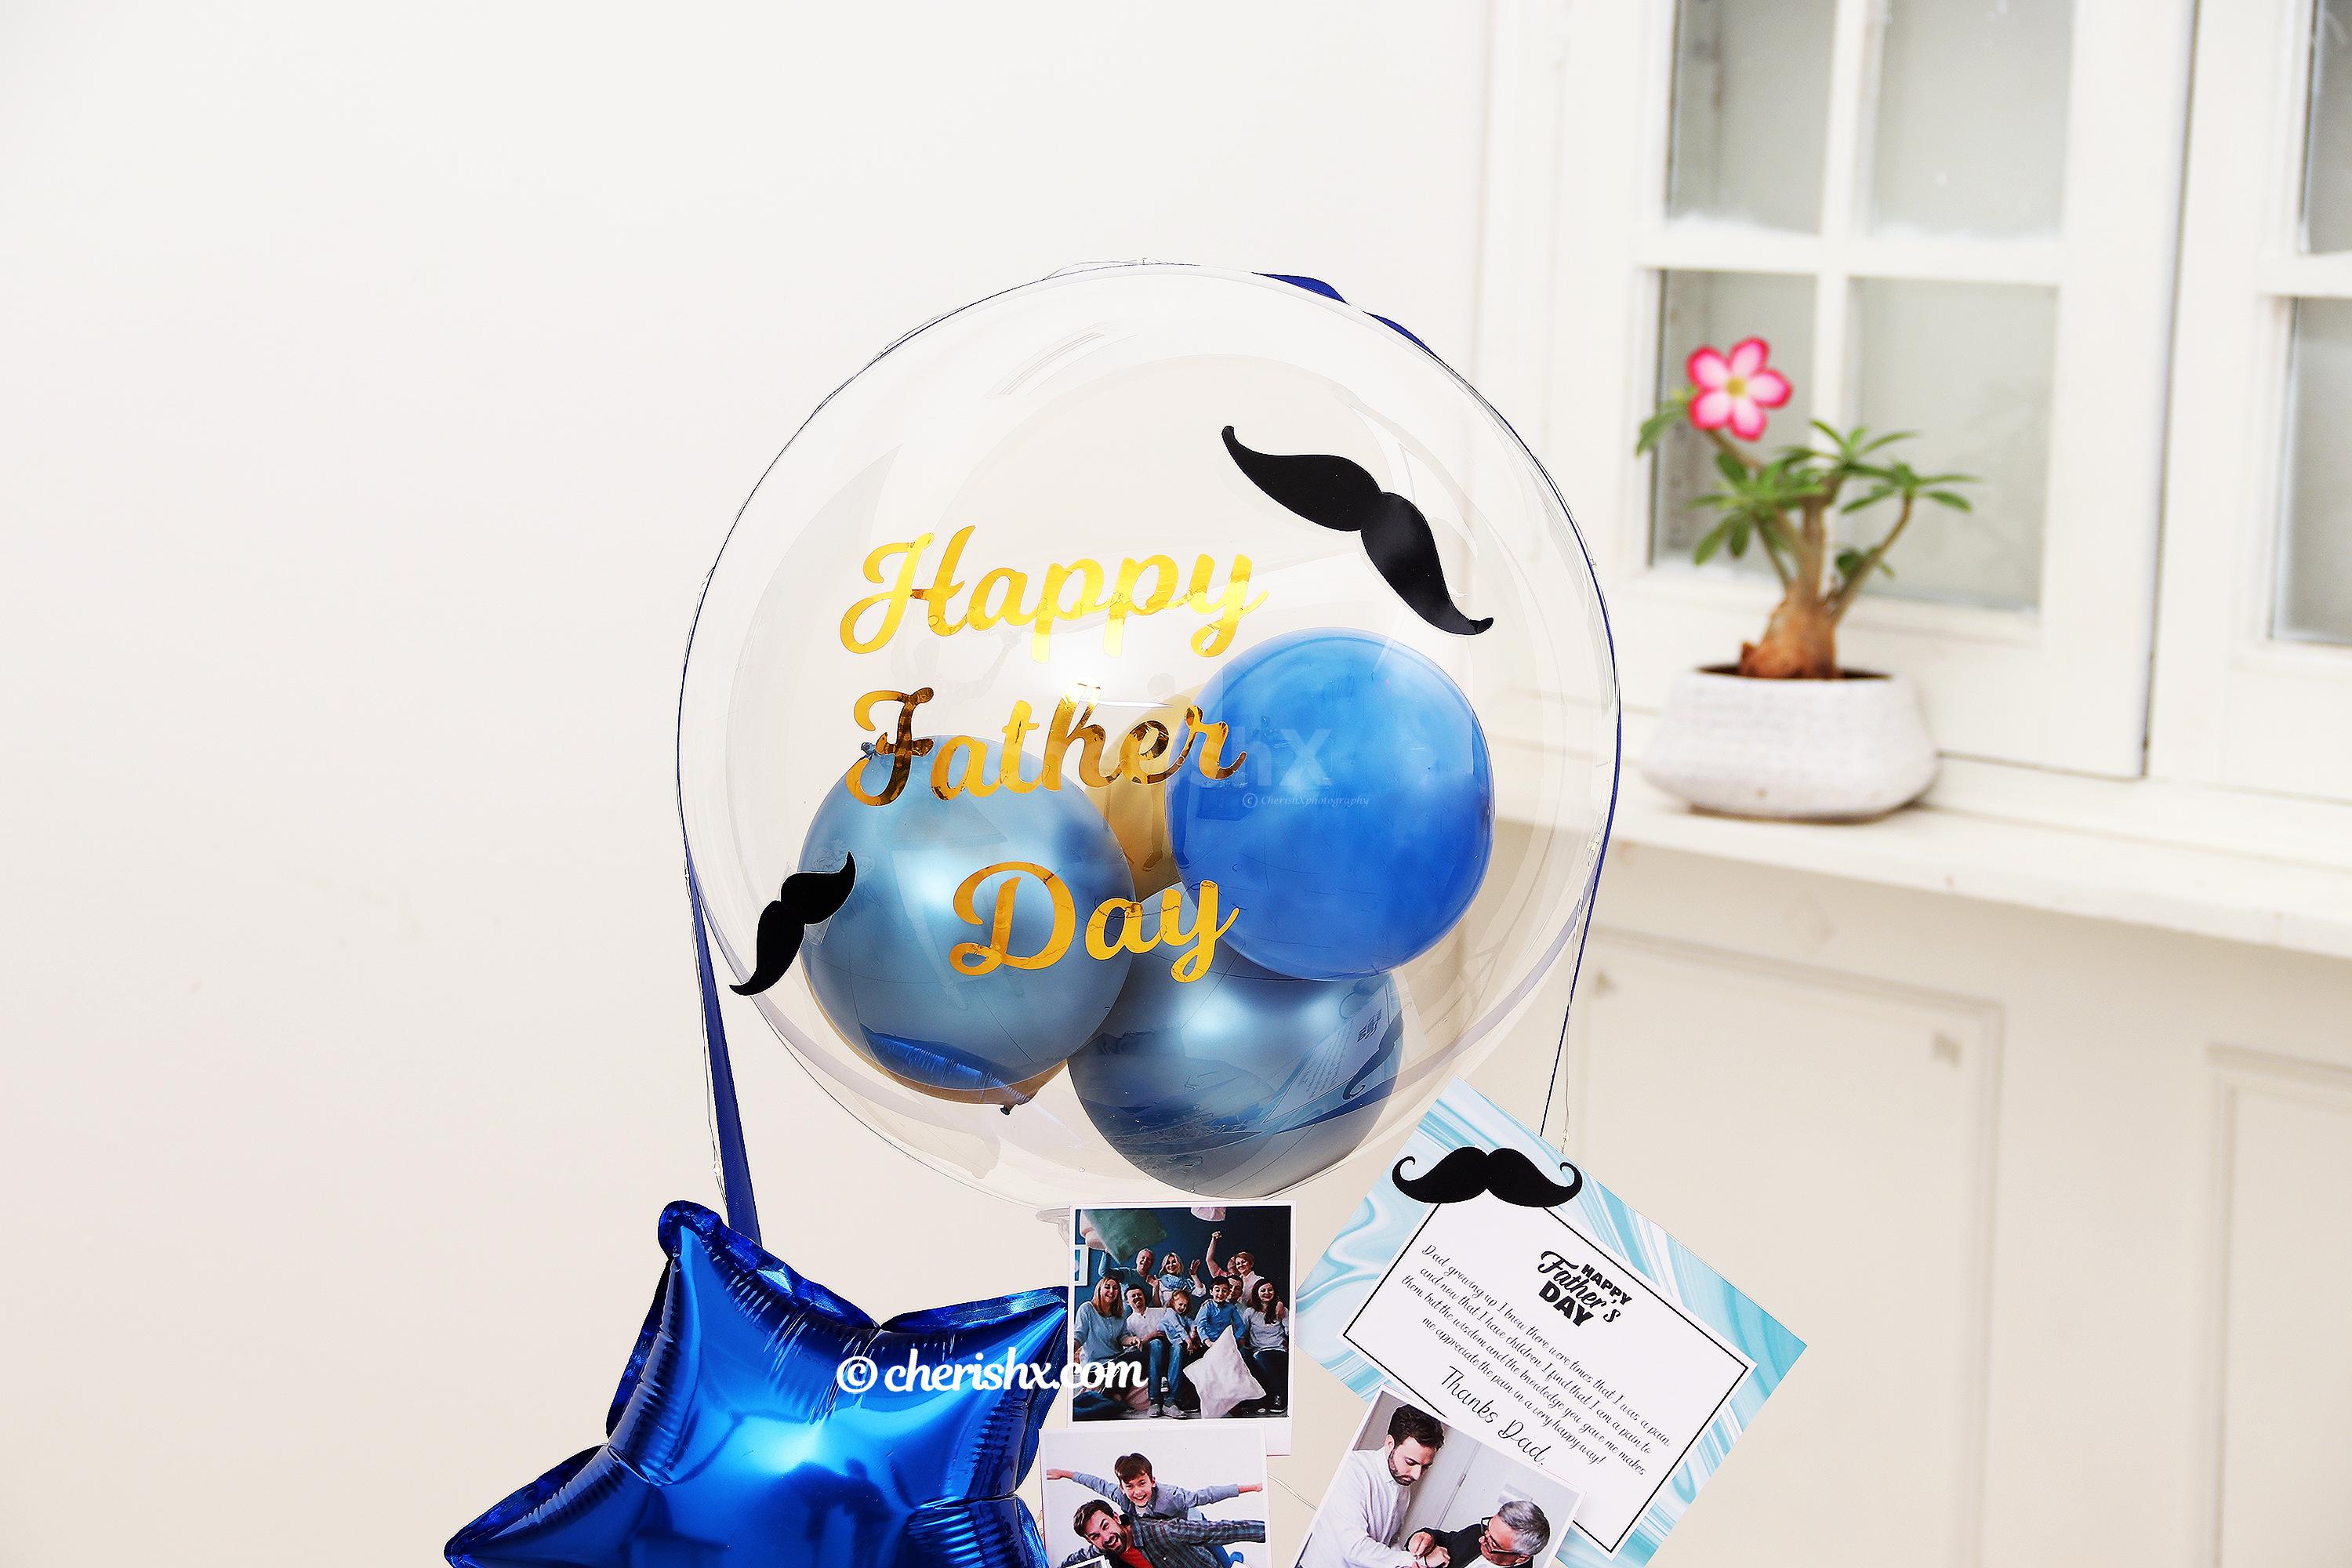 Shower your love upon your loving DAD with this Blue & Gold Father’s Day Bucket!